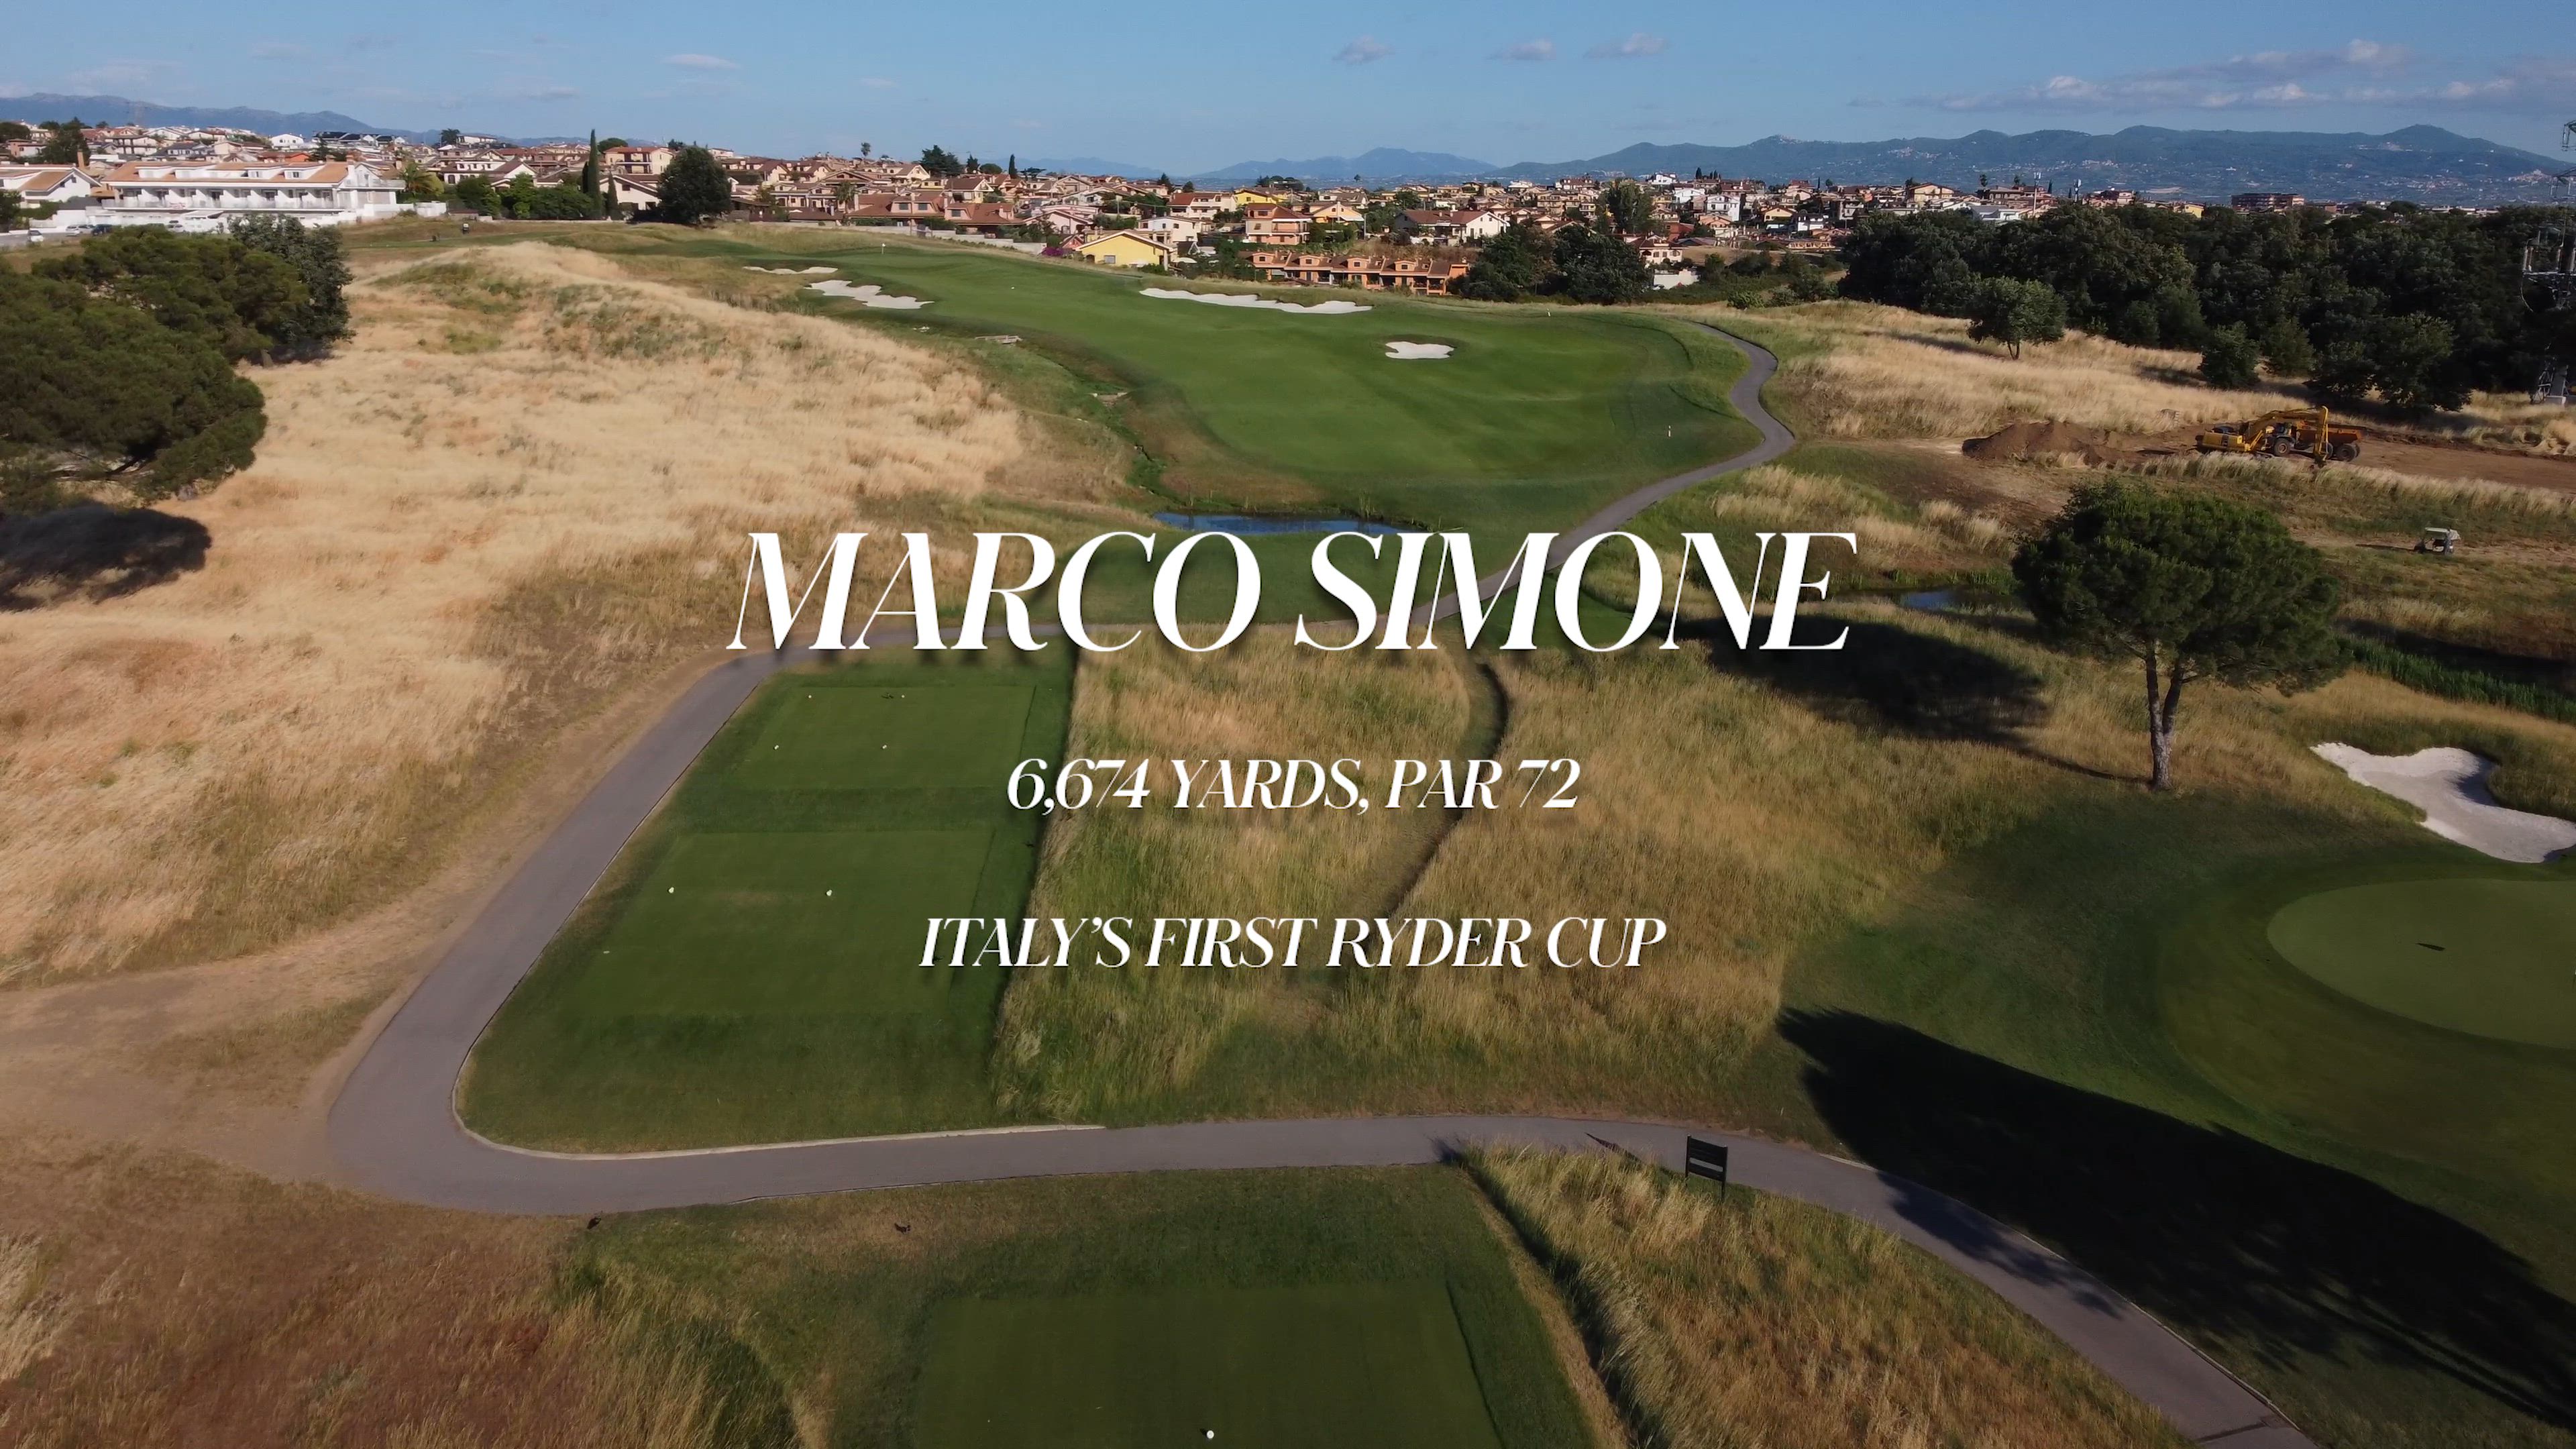 Views above Marco Simone, Italy's first Ryder Cup venue